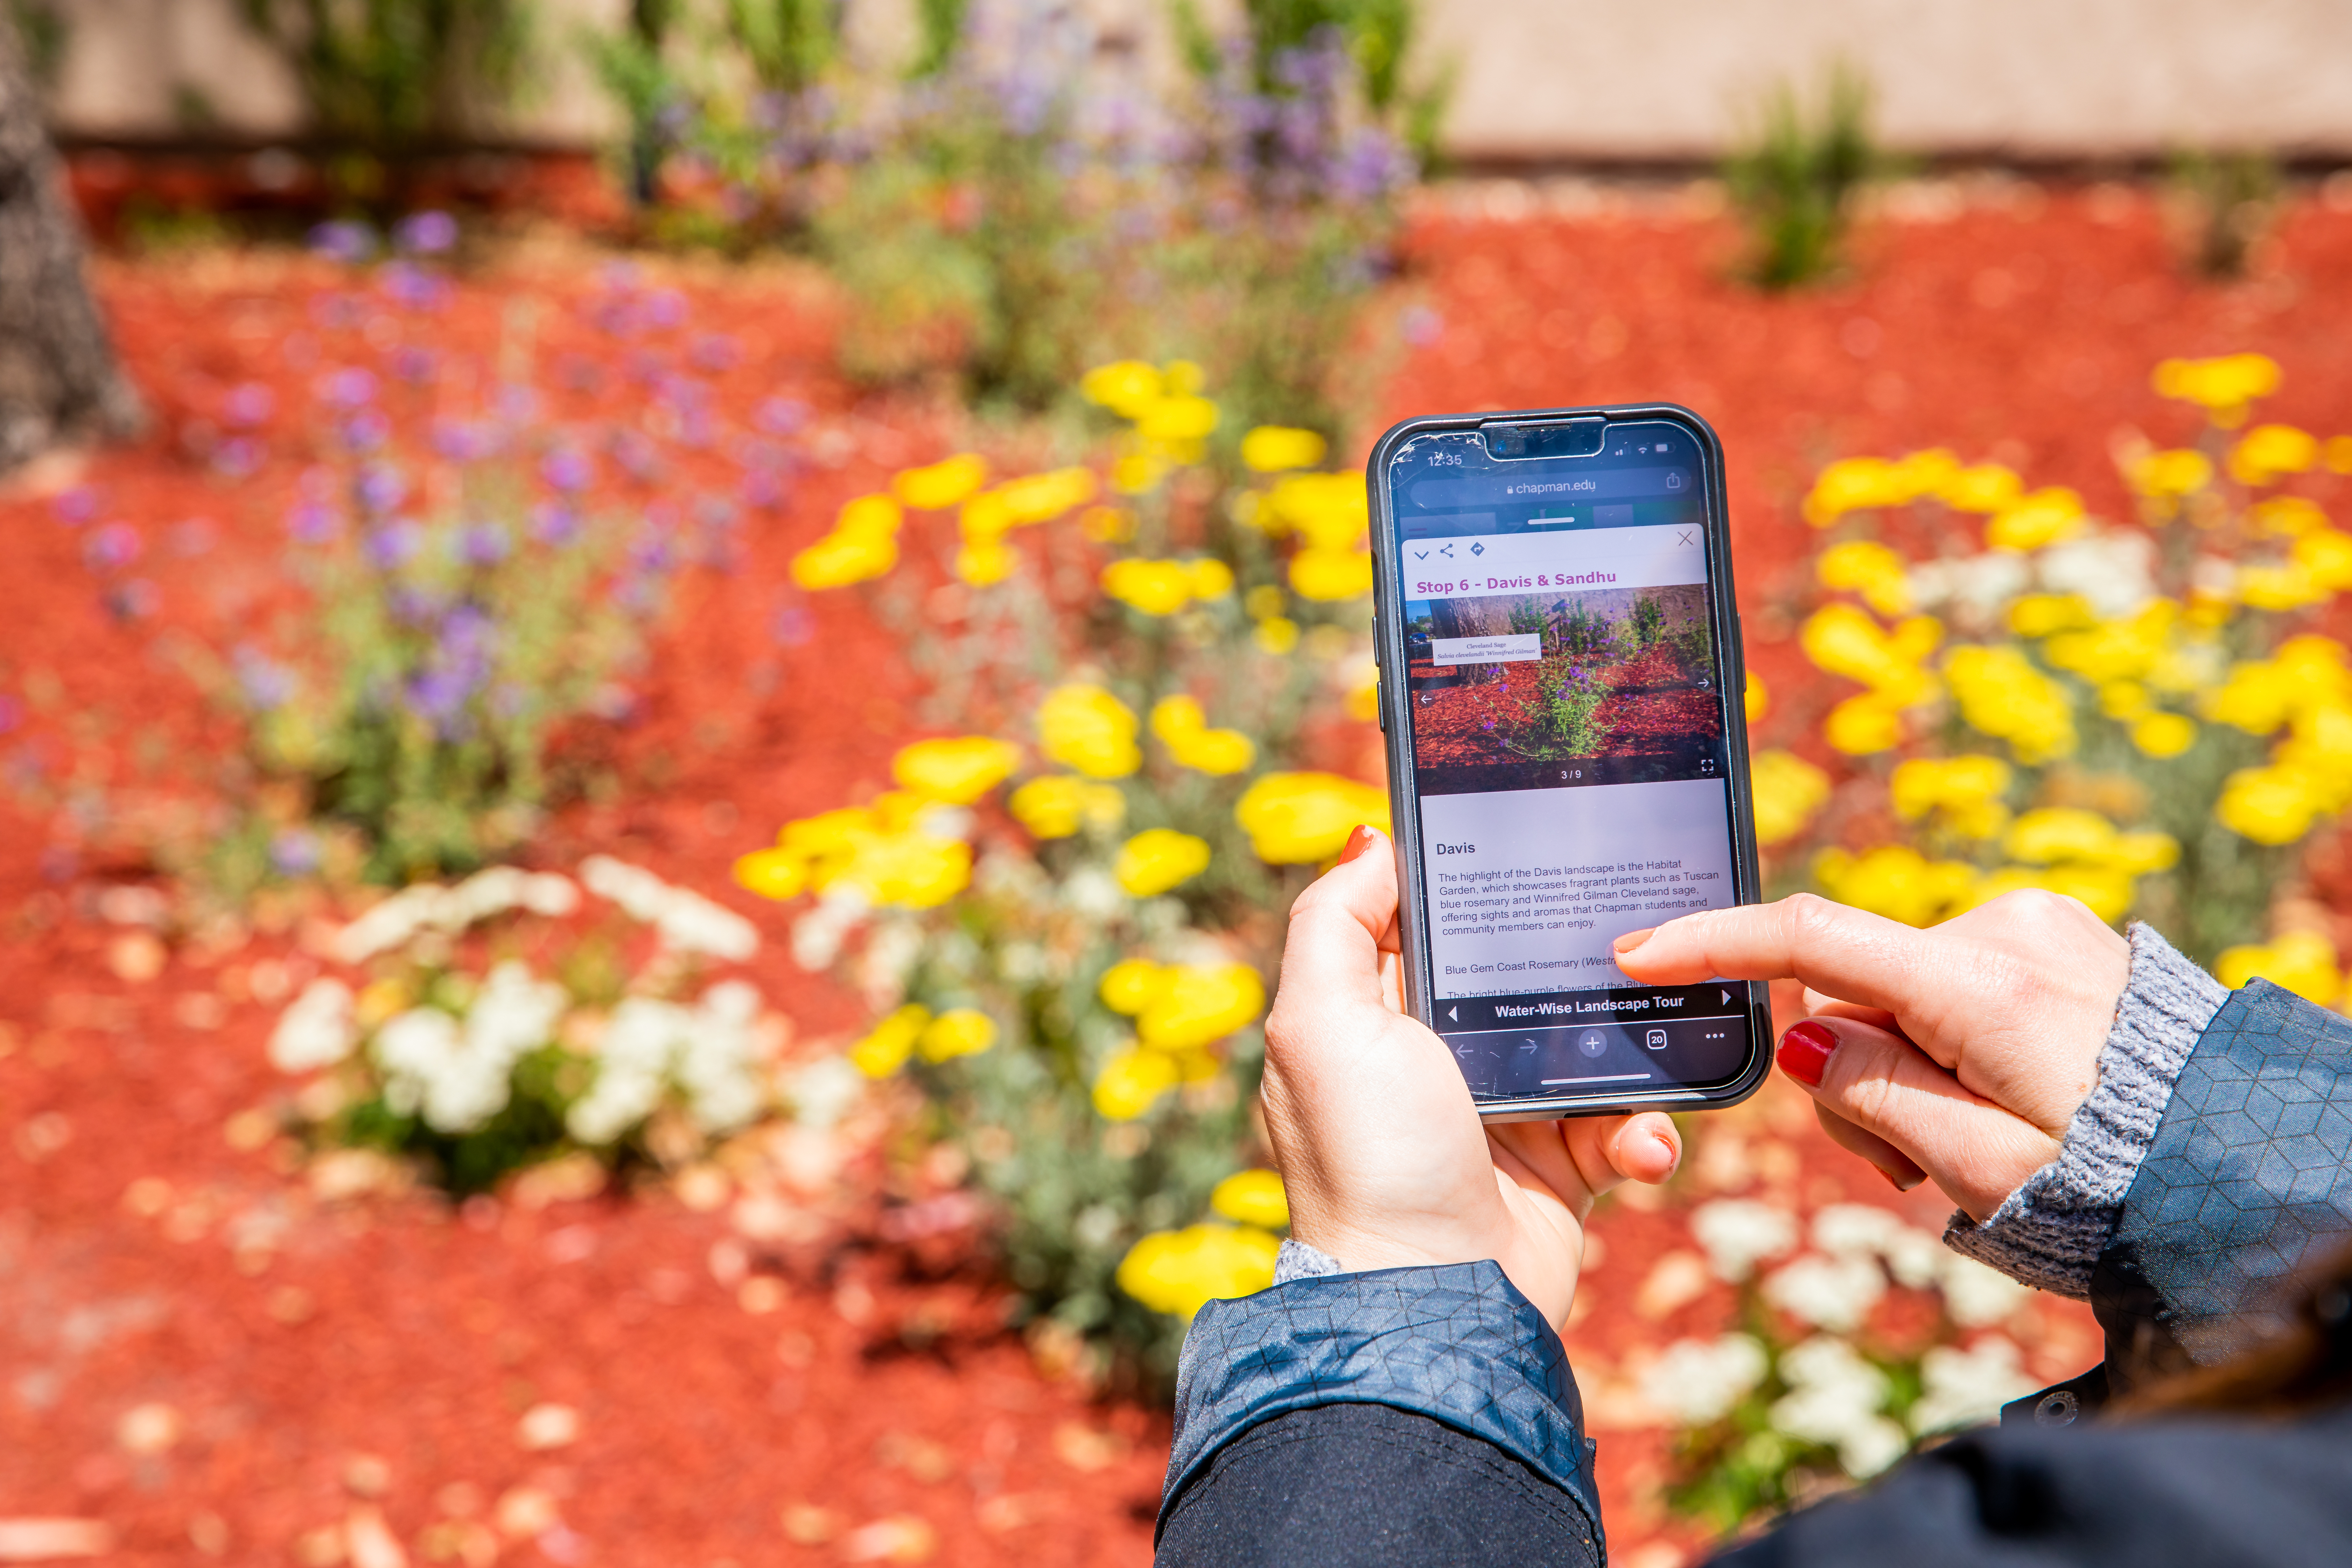 The smartphone displays information about landscaping on campus